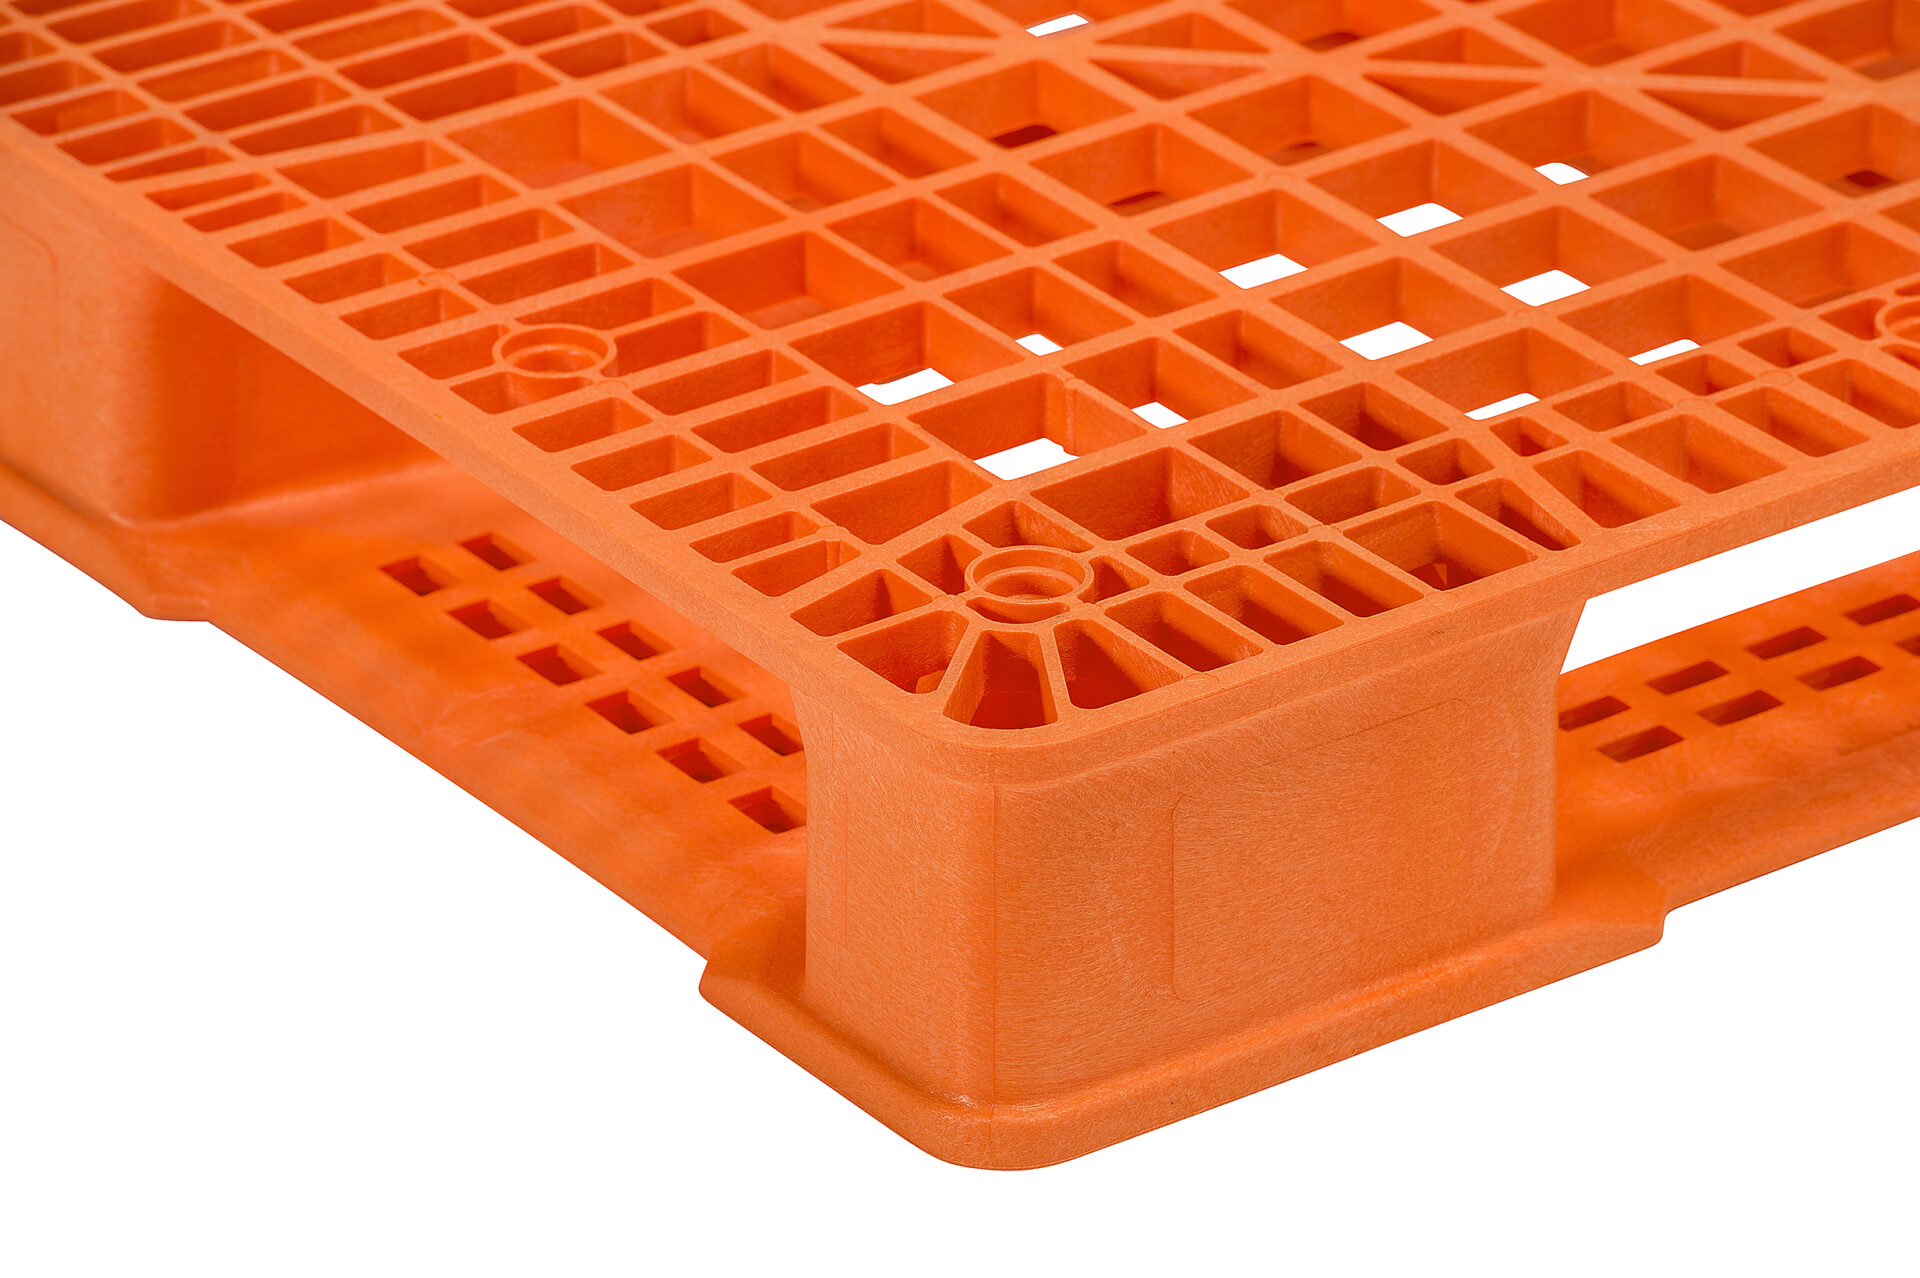 7 Factors to Consider Before You Buy Heavy Duty Plastic Pallets